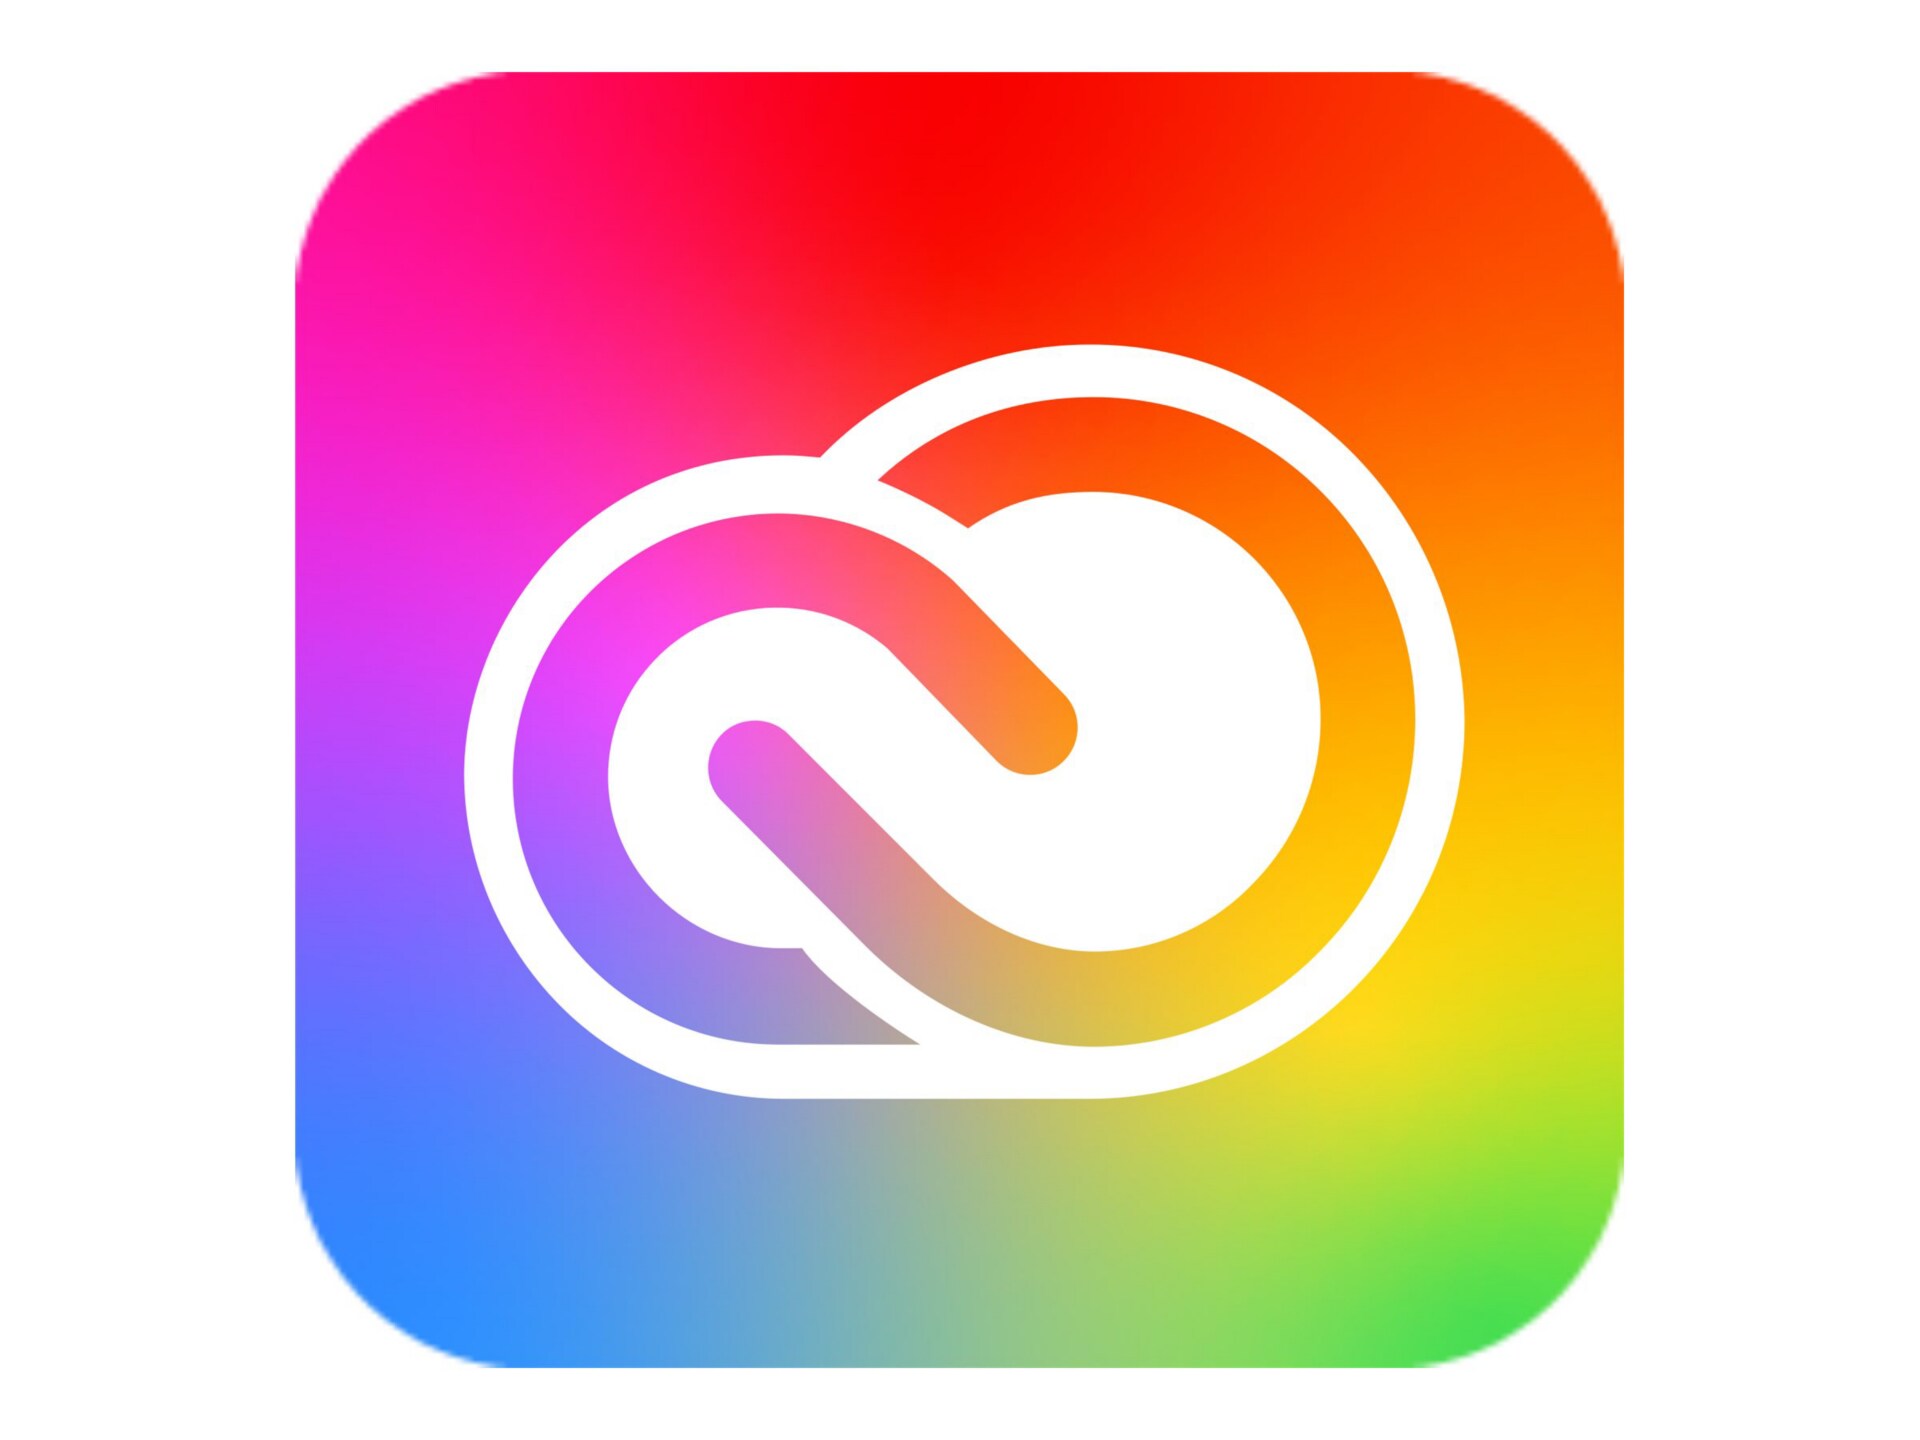 Adobe Creative Cloud for Enterprise - All Apps - Subscription New (9 months) - 1 device